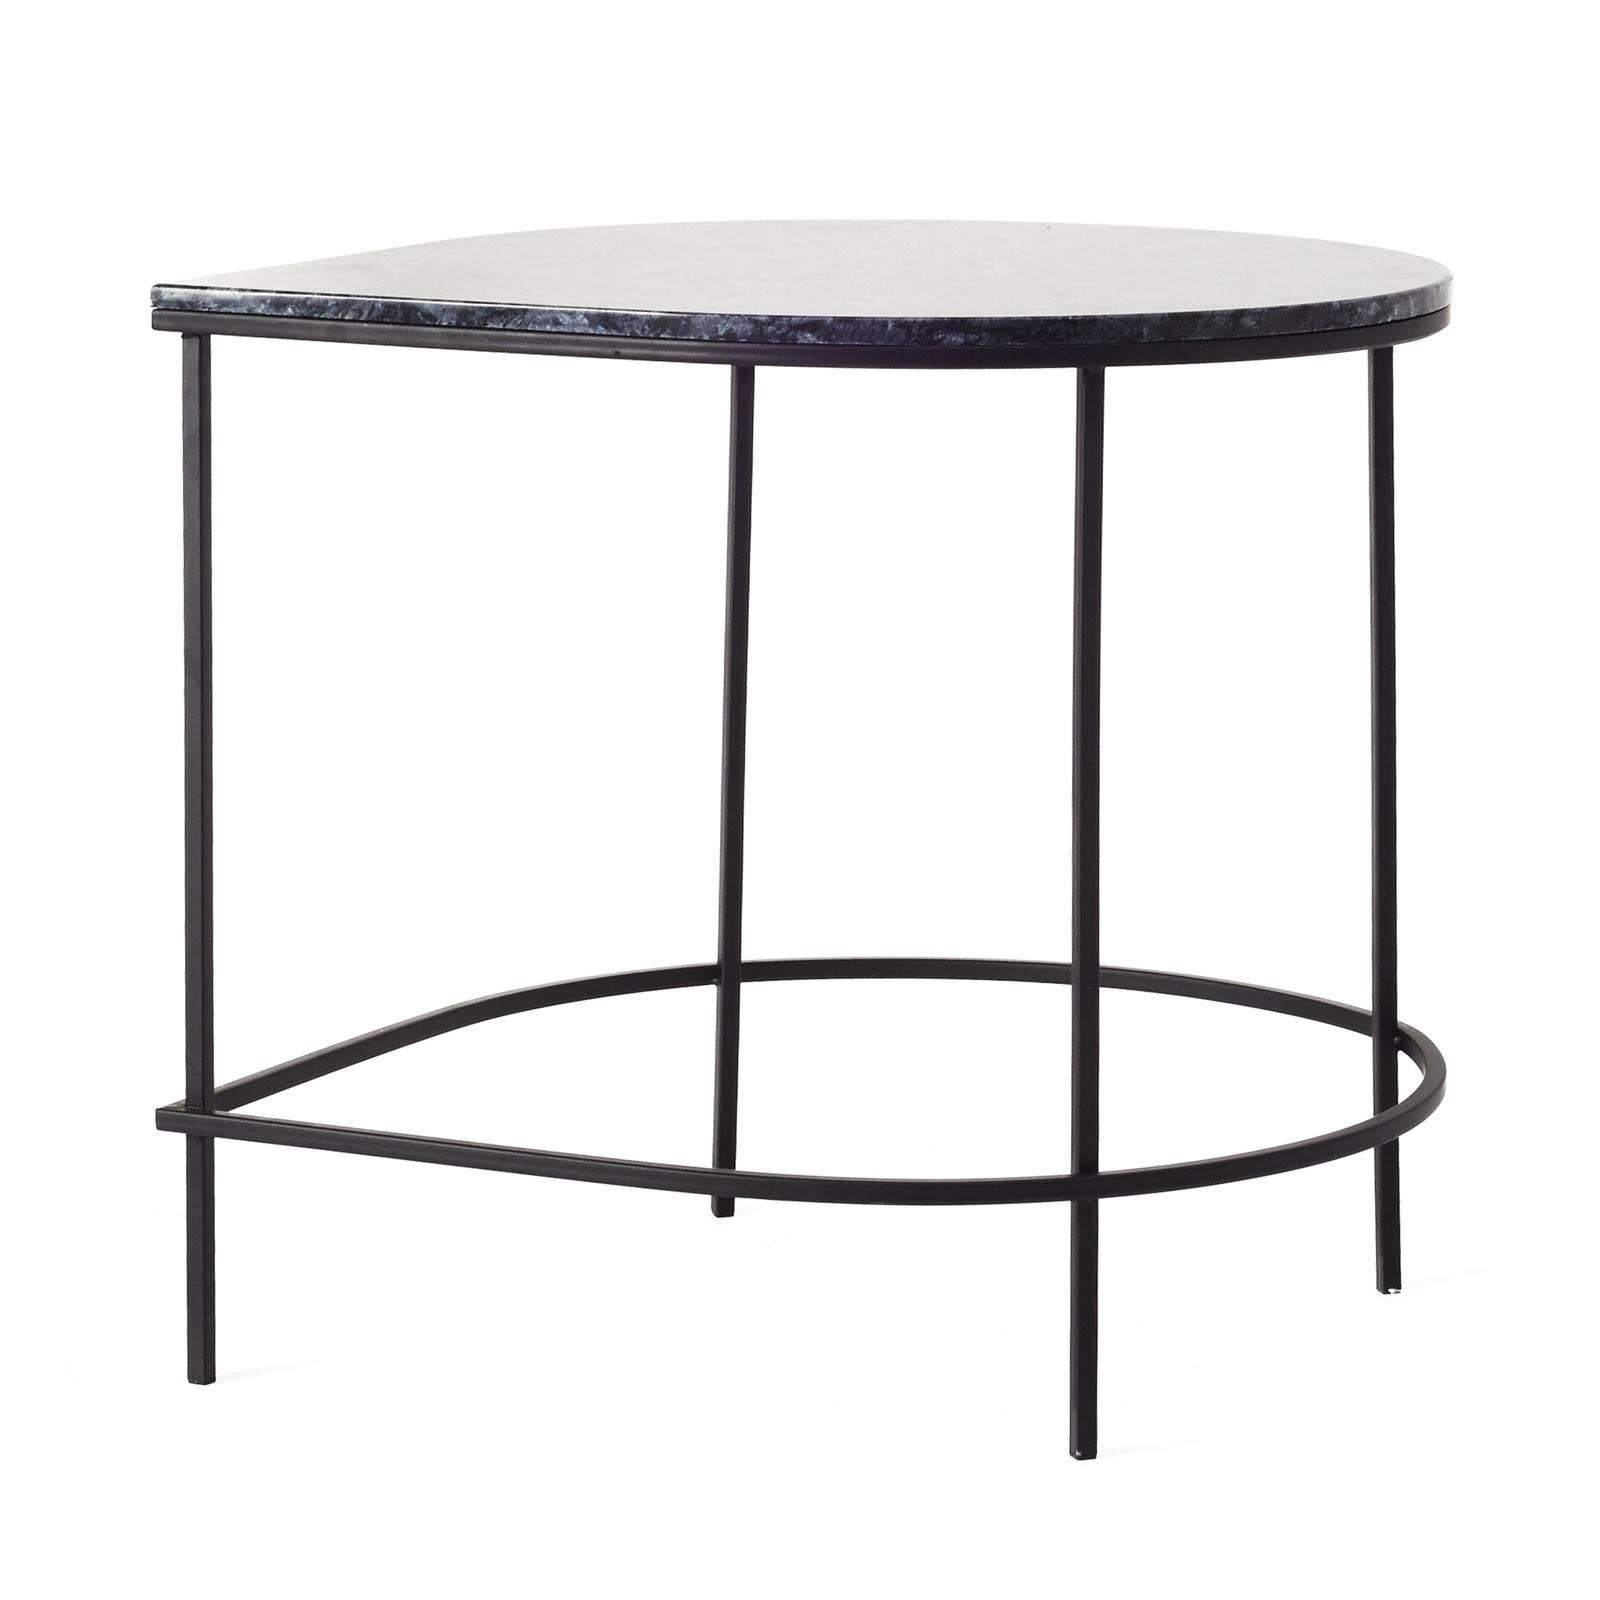 Stila is all about simple elegance and luxury materials. Marble makes everything better.

Use separately as side tables, or together as a clover-shaped coffee table. Price is per side table.

Measures: Single table: 23.5" L x 19" W x